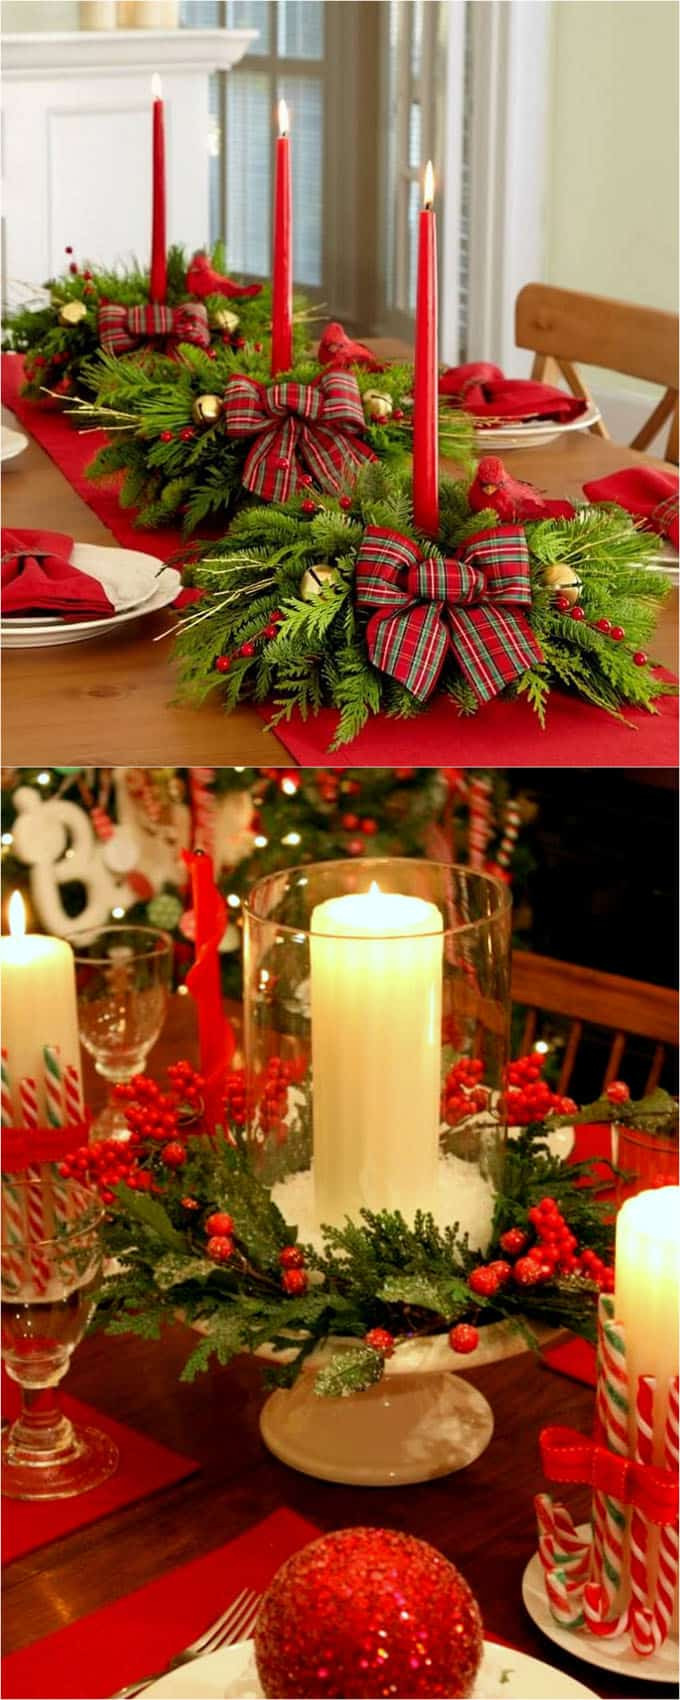 Christmas Table Centerpiece Ideas
 27 Gorgeous DIY Thanksgiving & Christmas Table Decorations